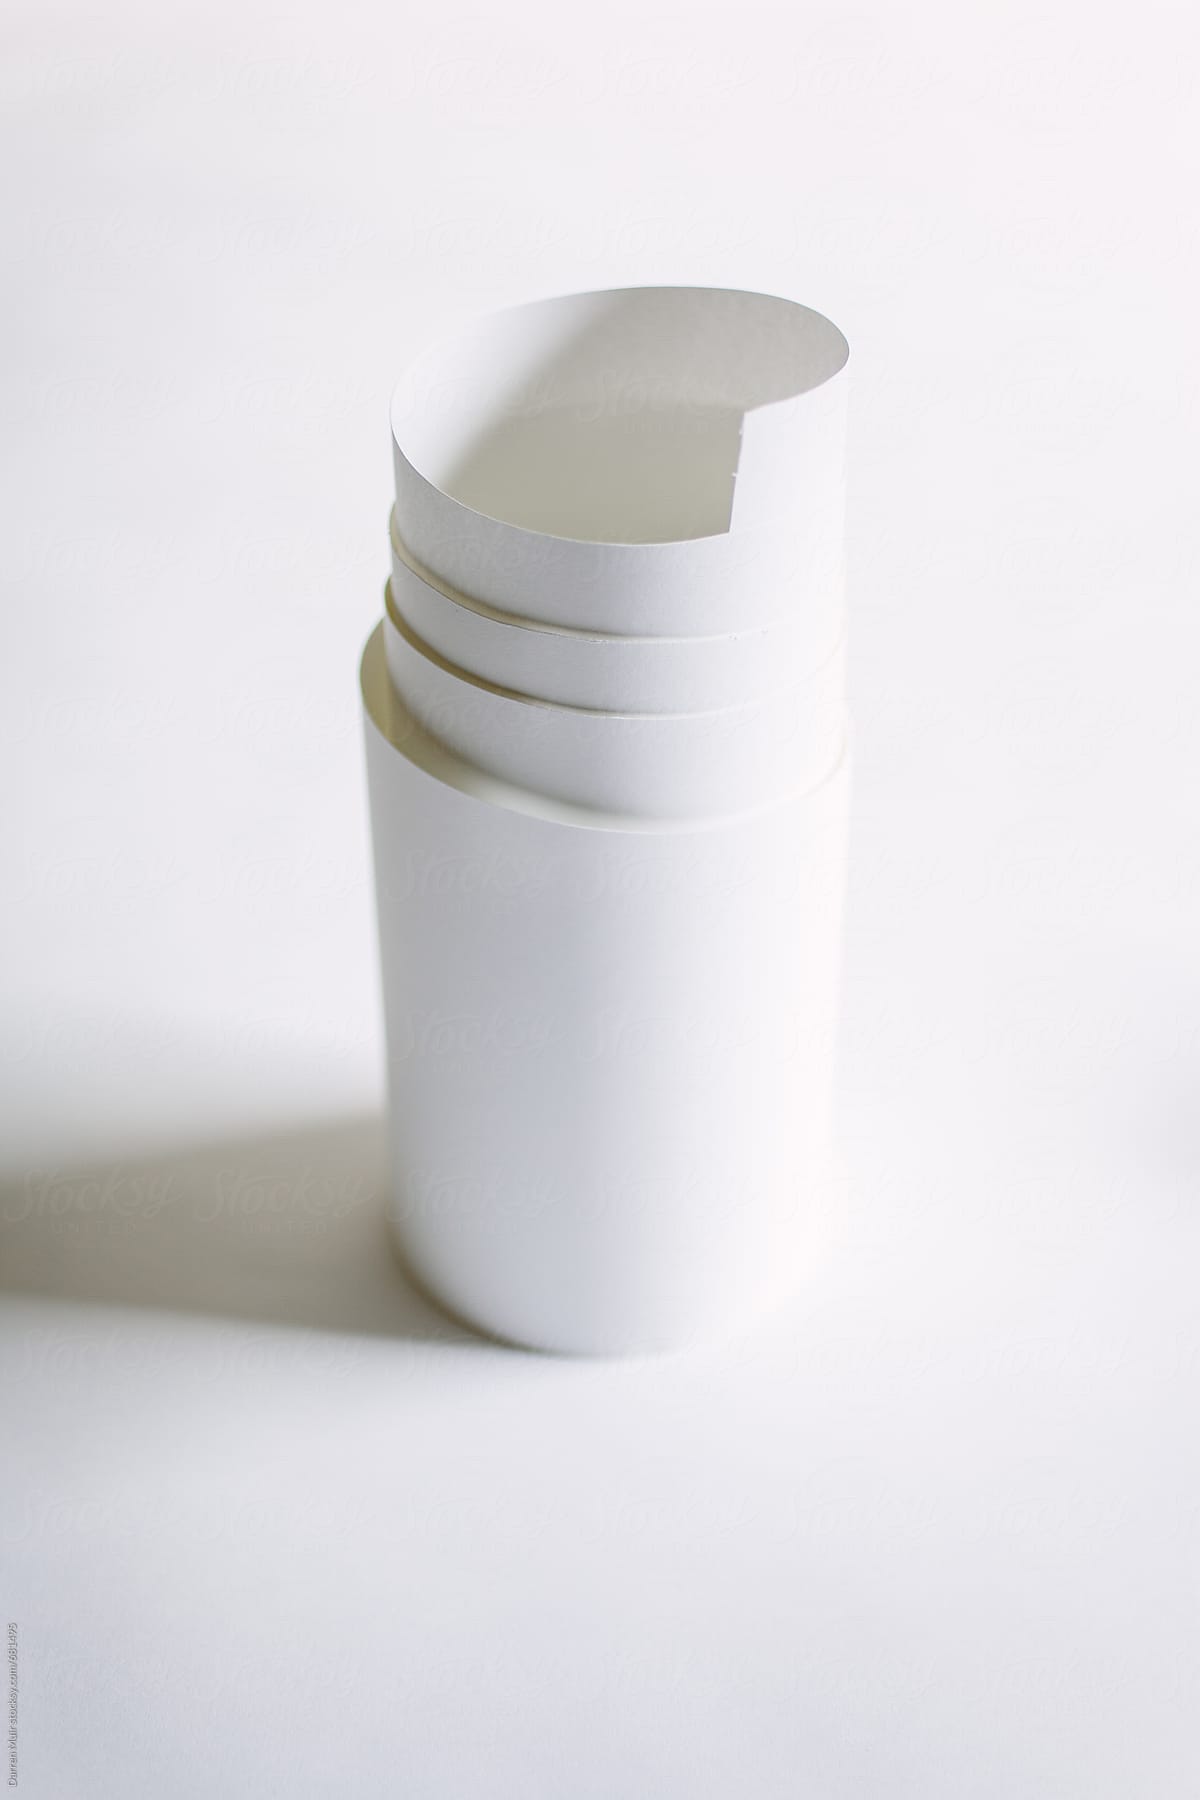 A roll of white paper on a white background.